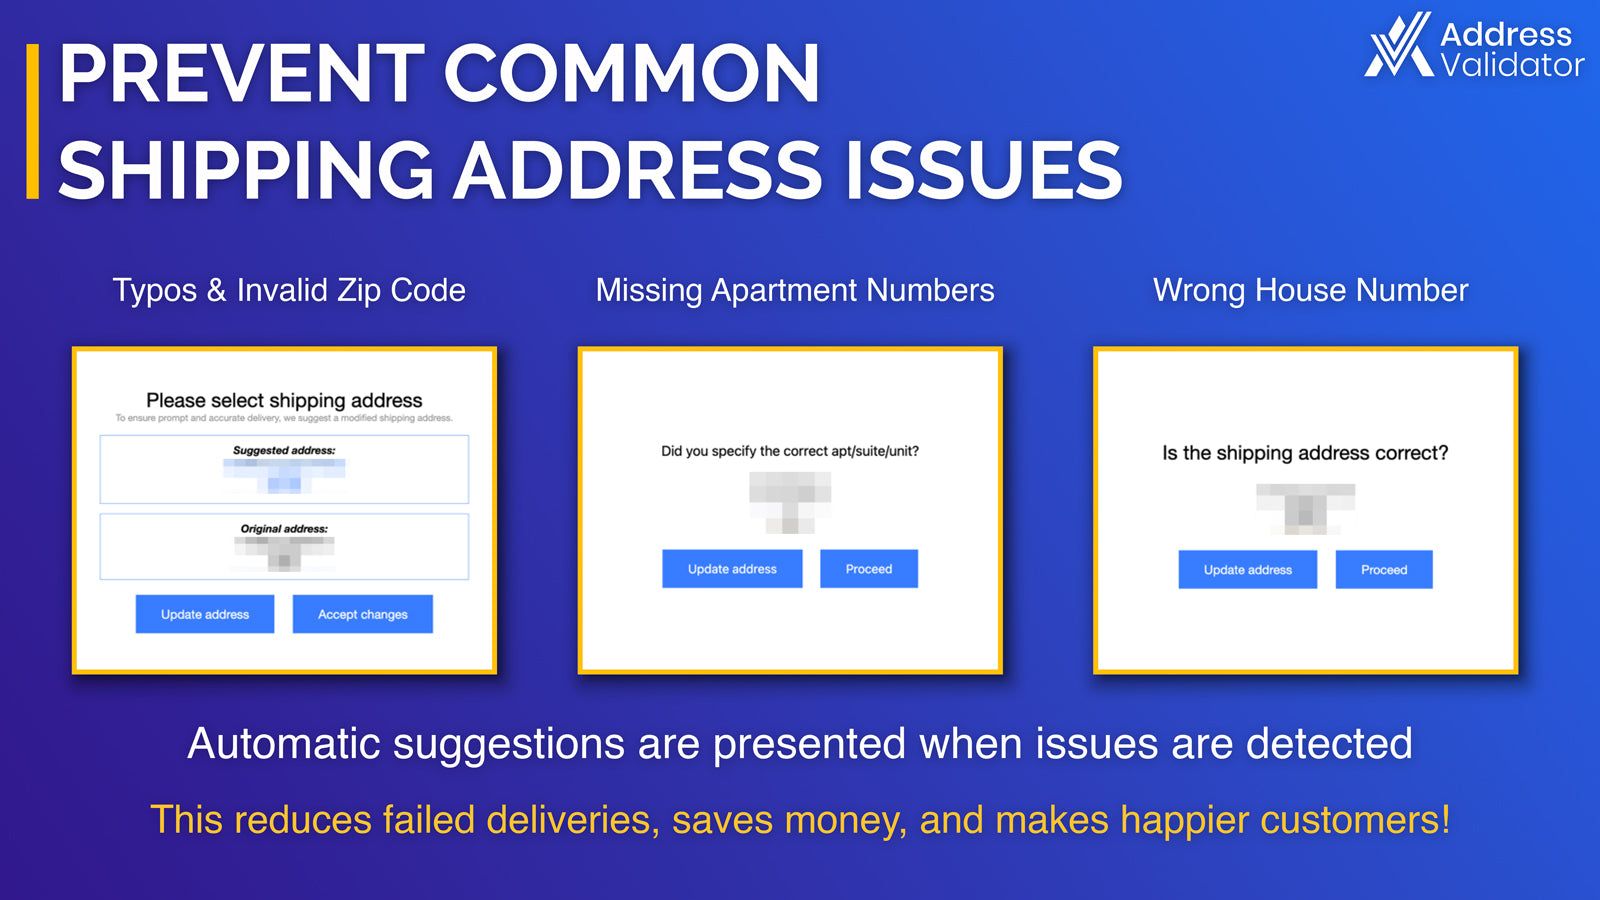 address validation to prevent common shipping address issues